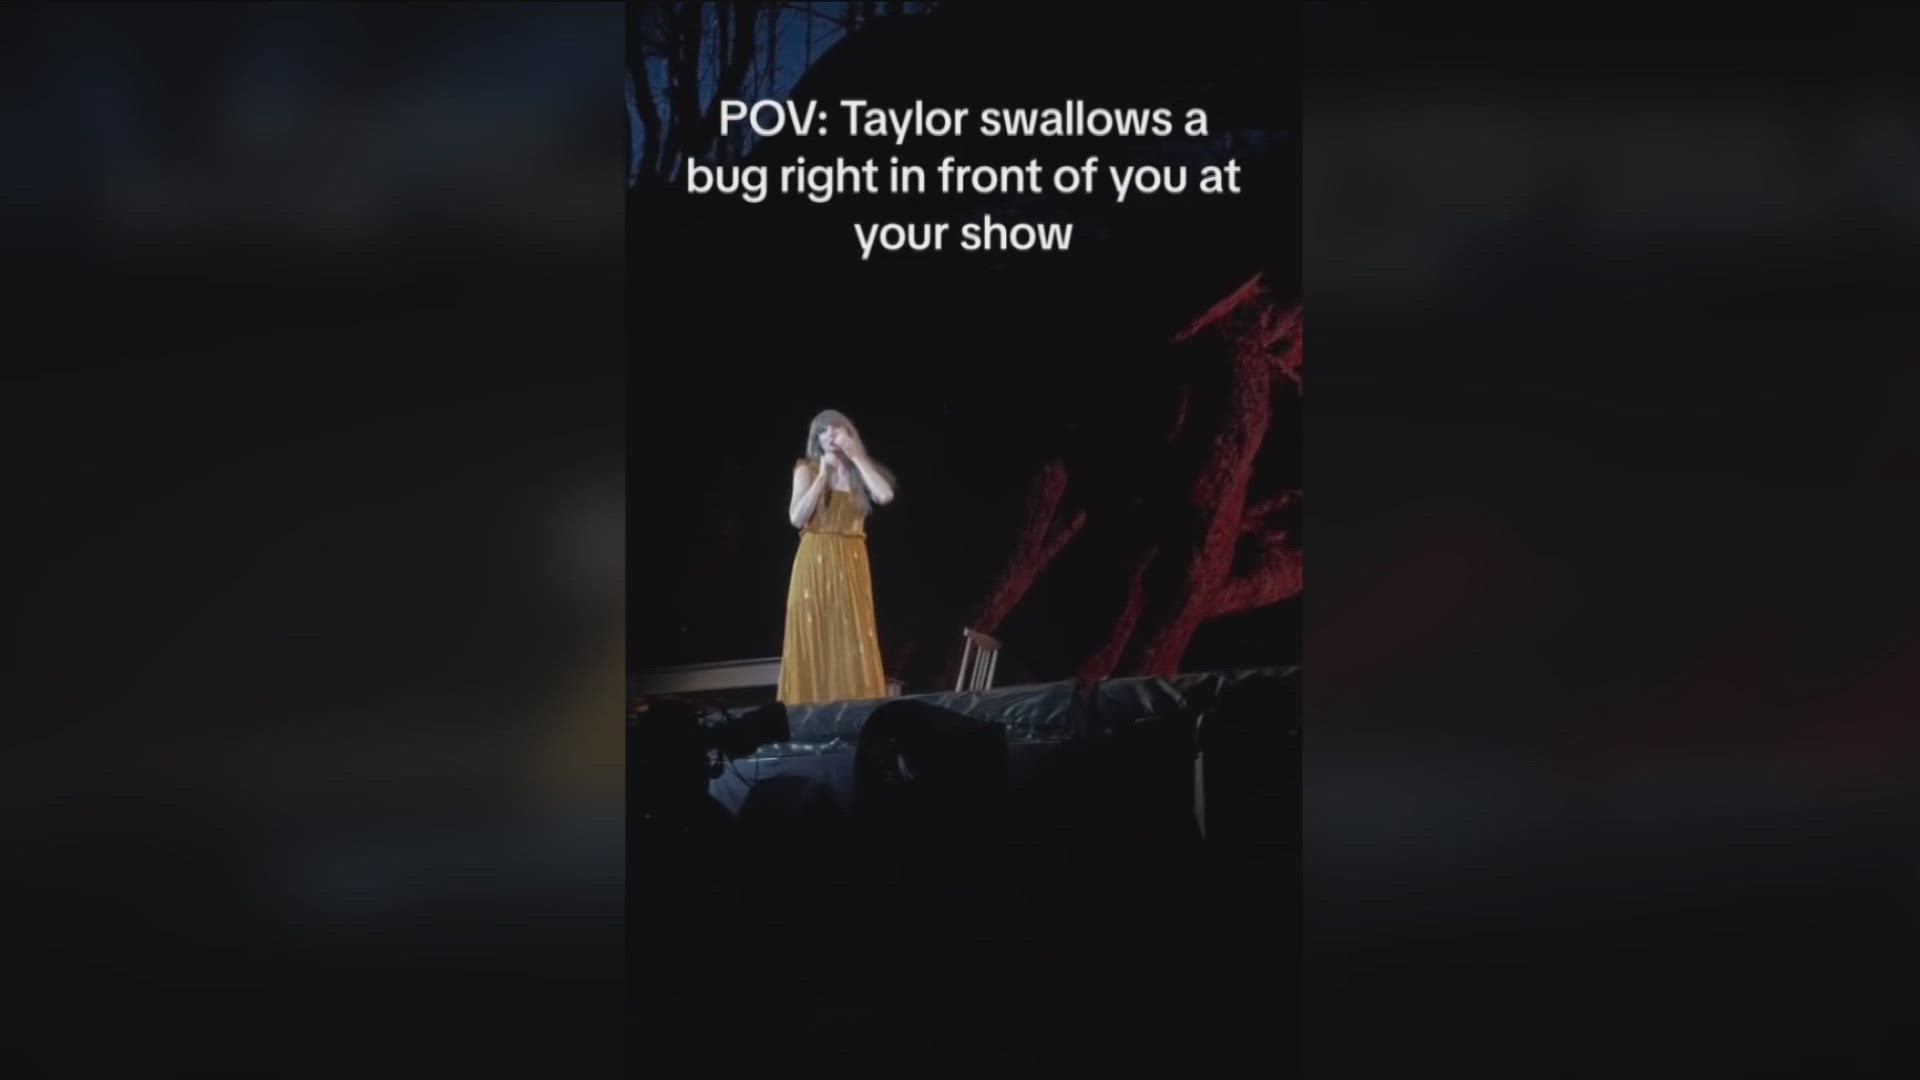 Swift was chatting with the crowd at Soldier Field when she started coughing and turned her back. "Just swallowed a bug," she said.